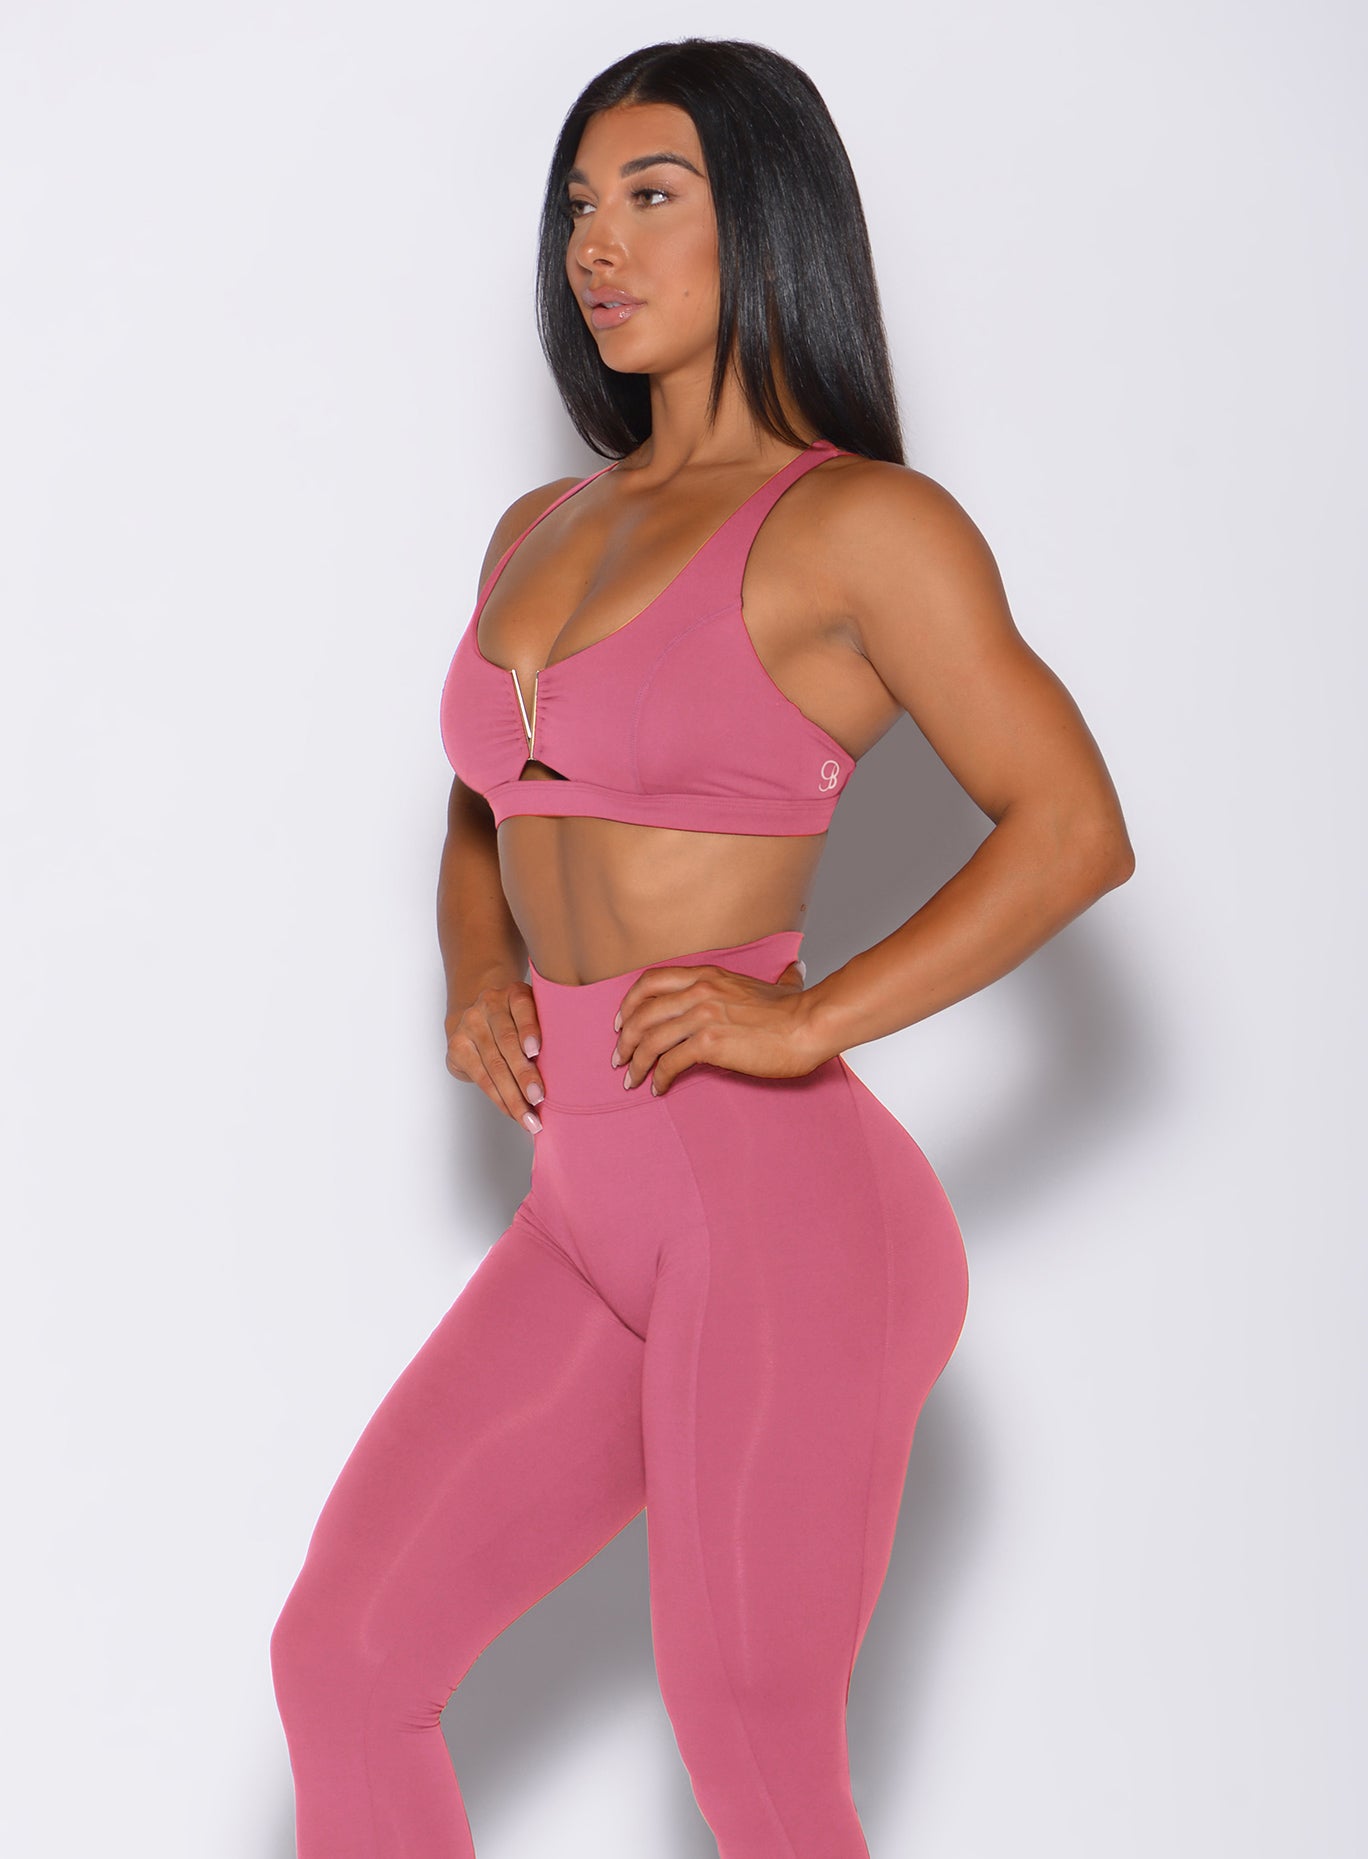 Left side profile view of a model angled to her left wearing our knockout sports bra in blush color and a matching leggings